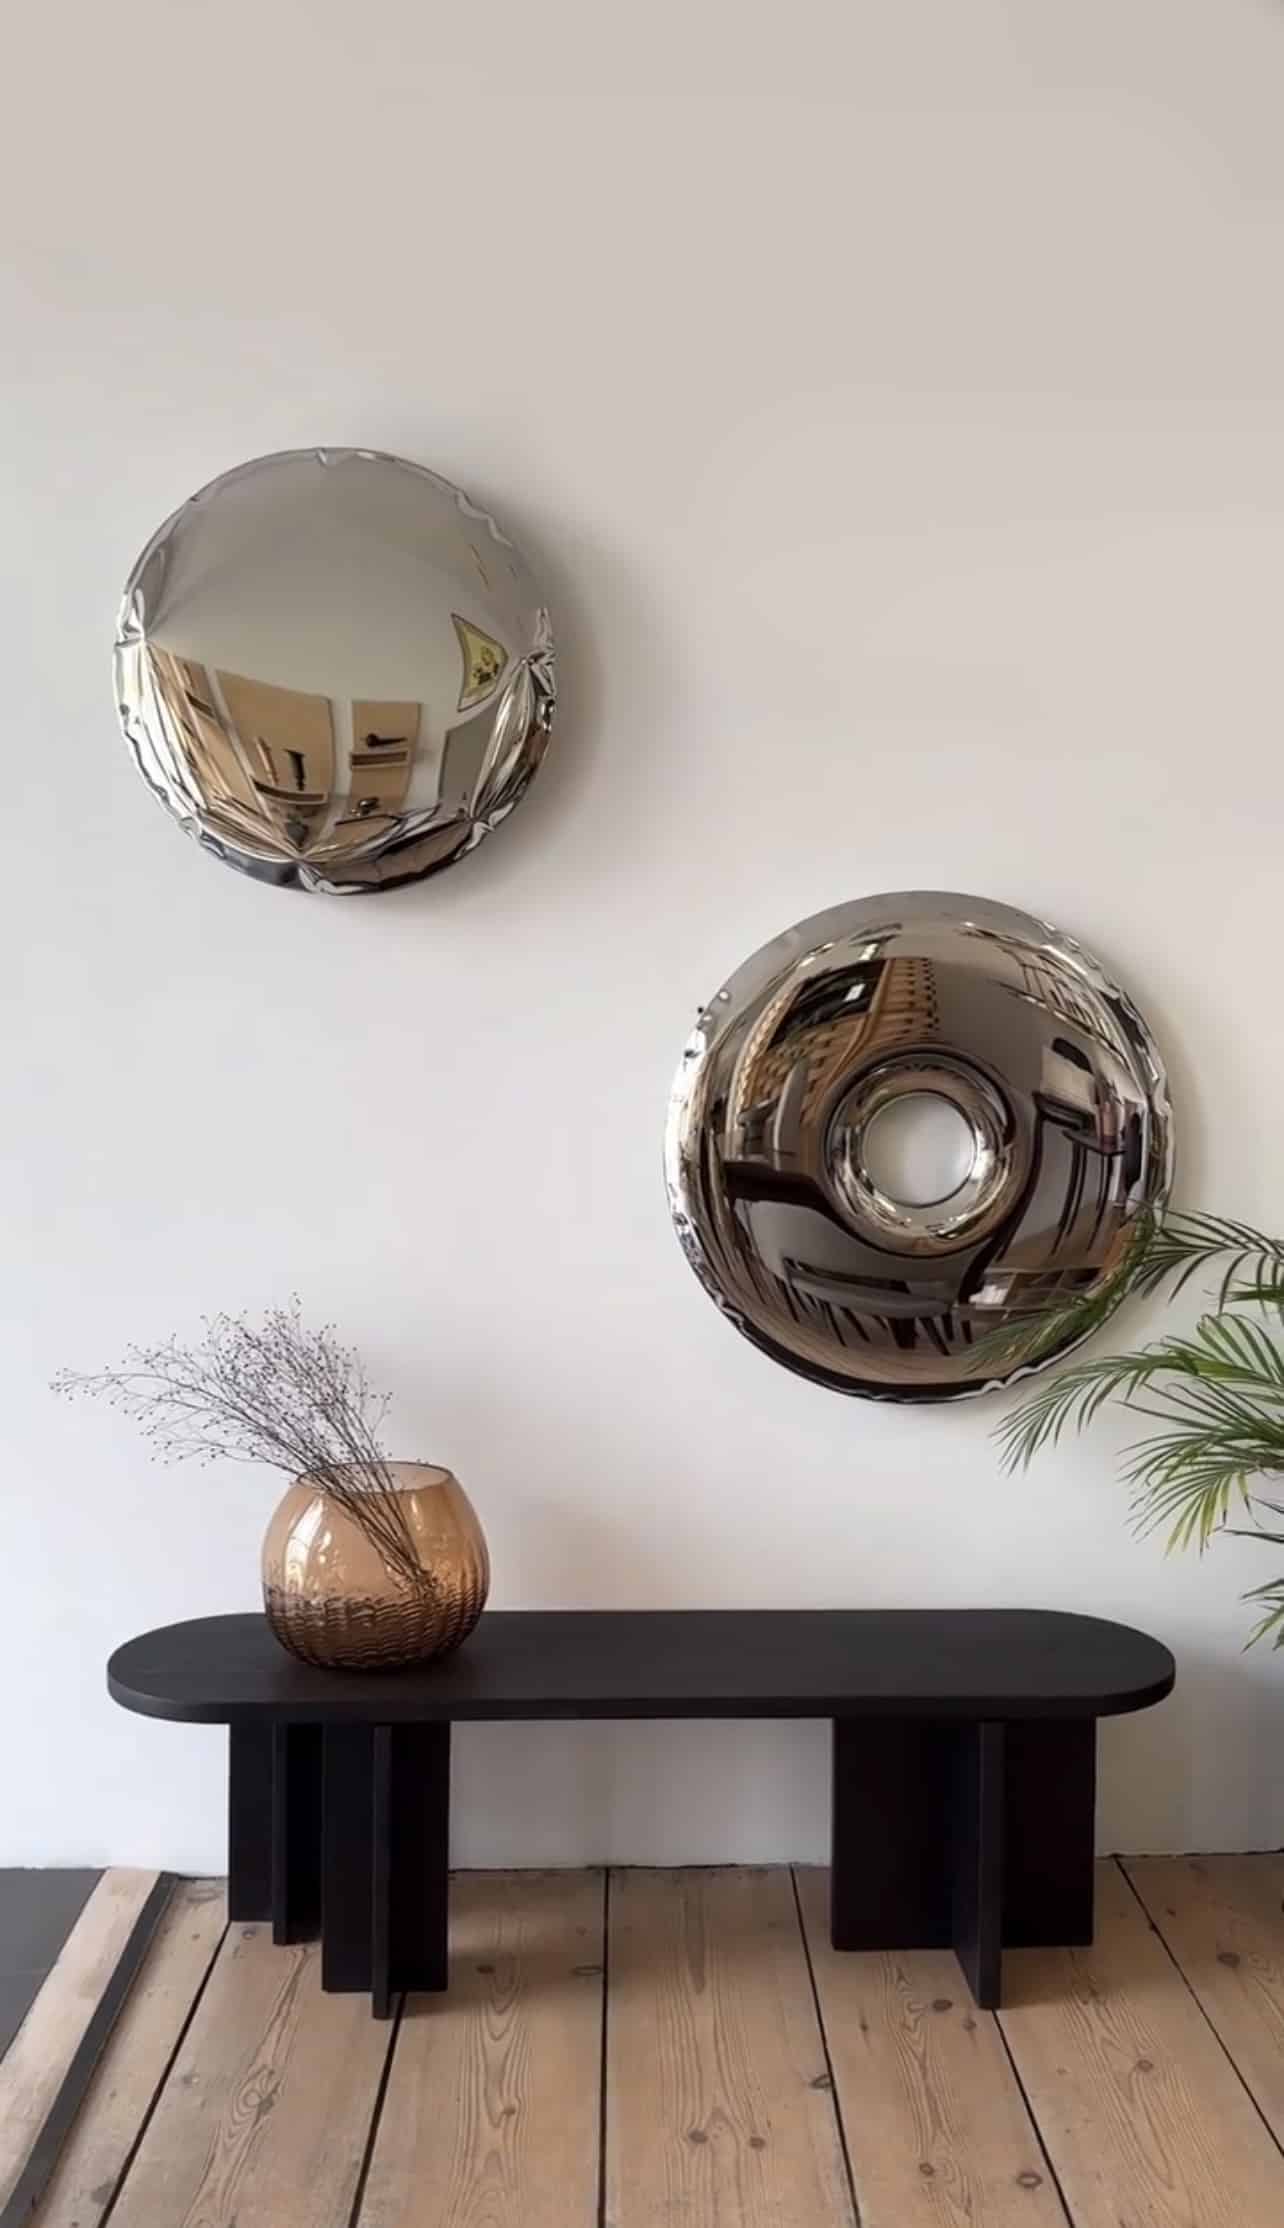 Two modern Solid Donut Mirrors above a black bench with a decorative vase and a plant on a wooden floor against a light grey wall.